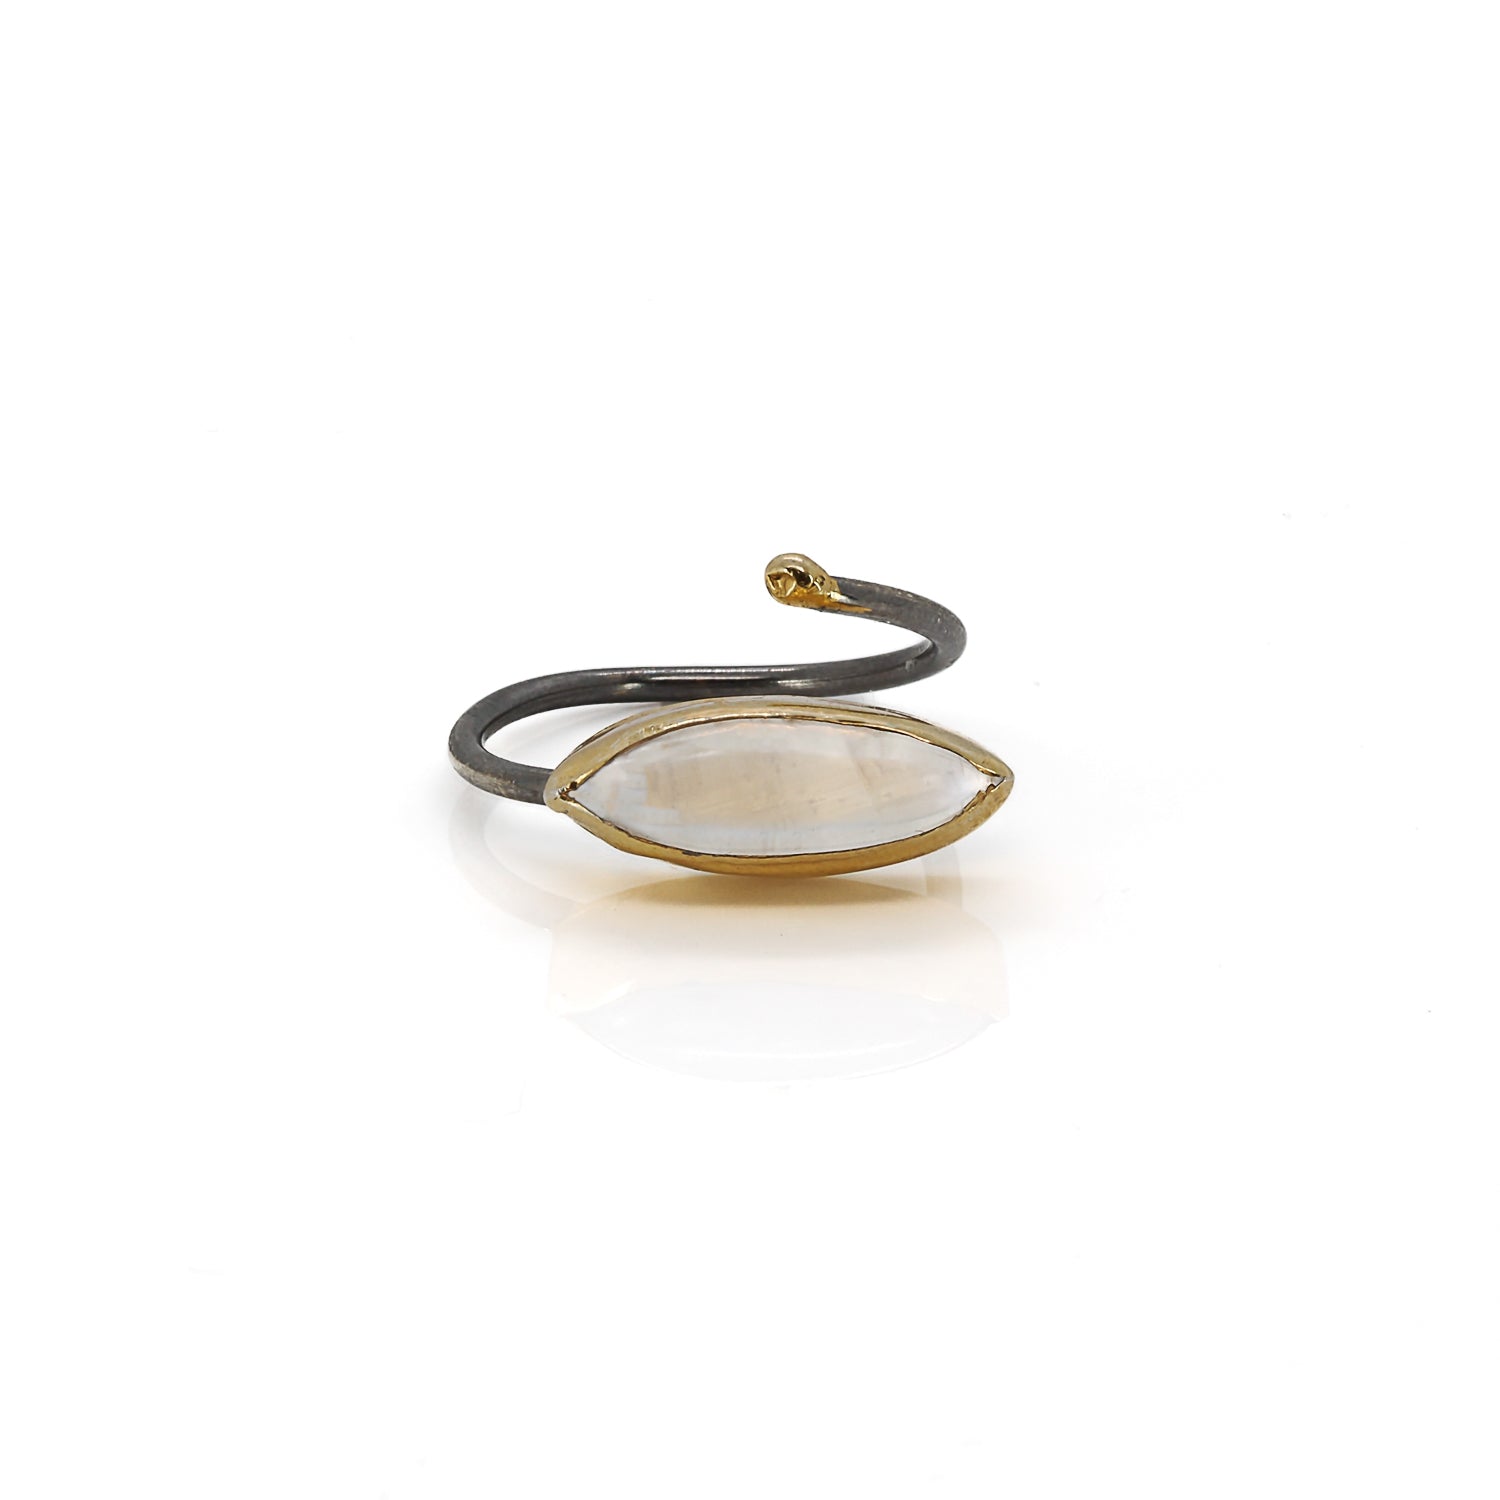 Good Fortune Moon Stone Ring - Sterling Silver and 18K Gold Plated